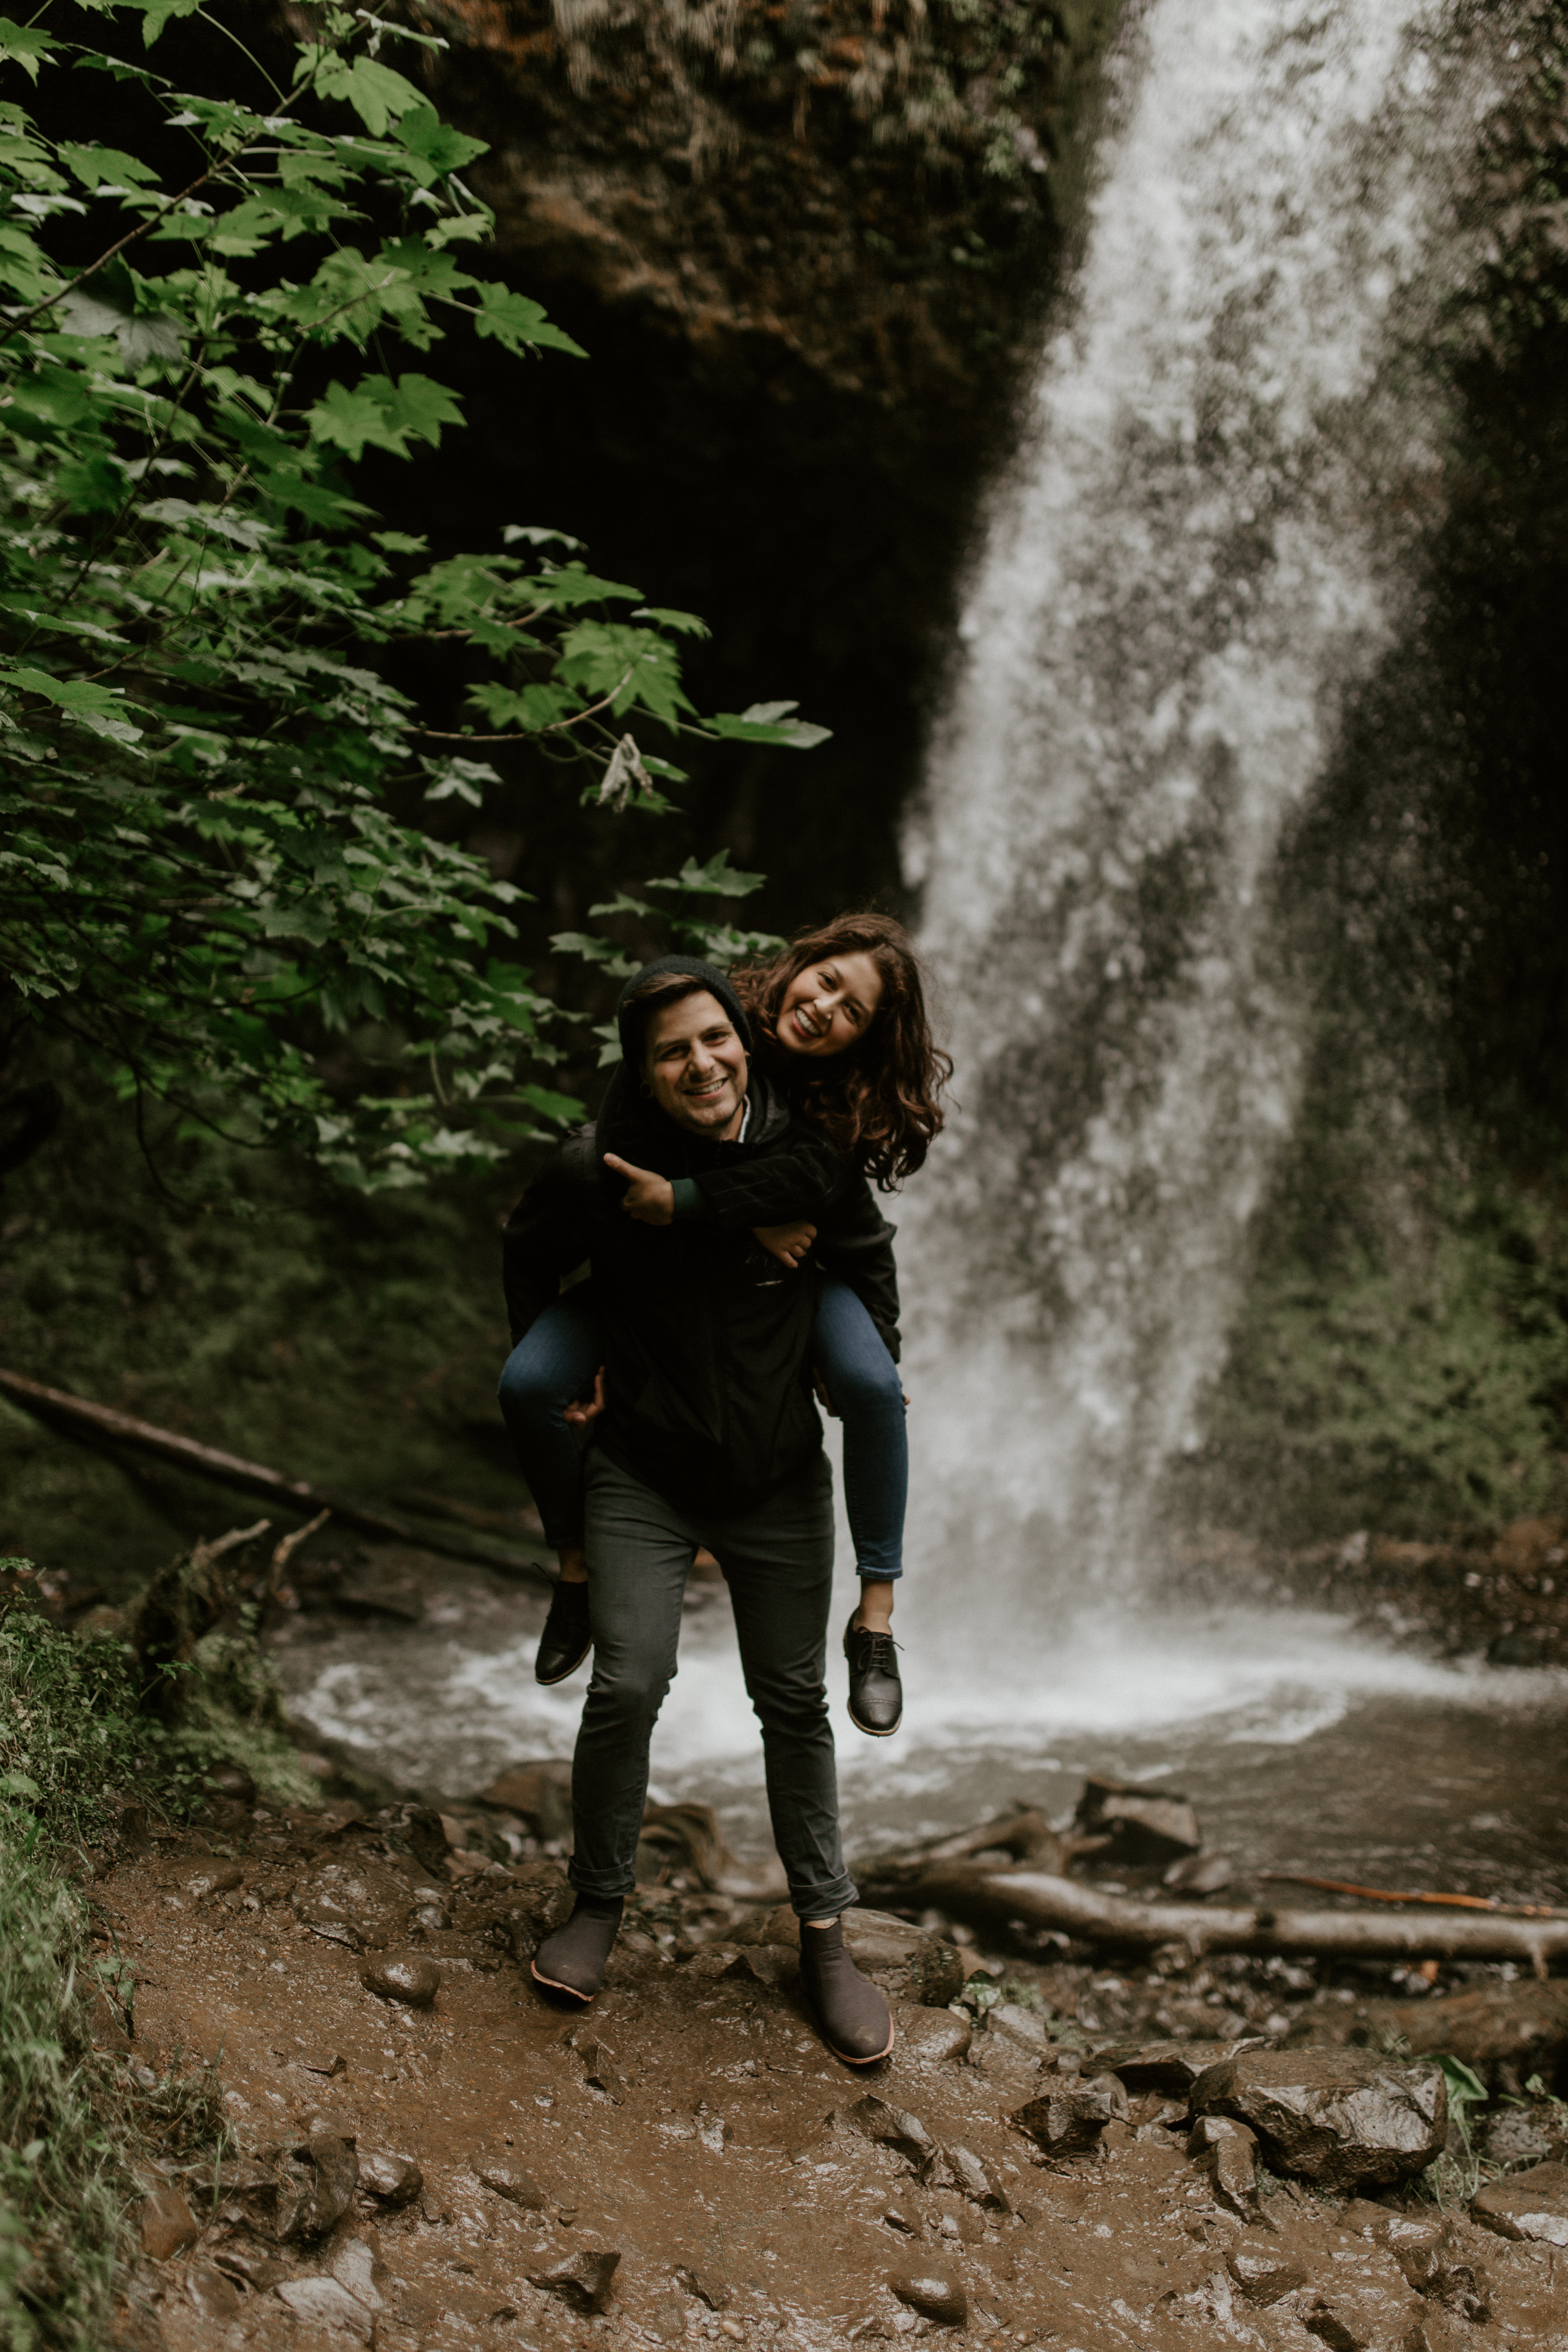 Chris gives Jasmine a piggy back ride in front of the upper falls of Latourell at the Columbia River Gorge in Oregon for her Oregon Adventure. Adventure photography in Portland Oregon by Sienna Plus Josh.